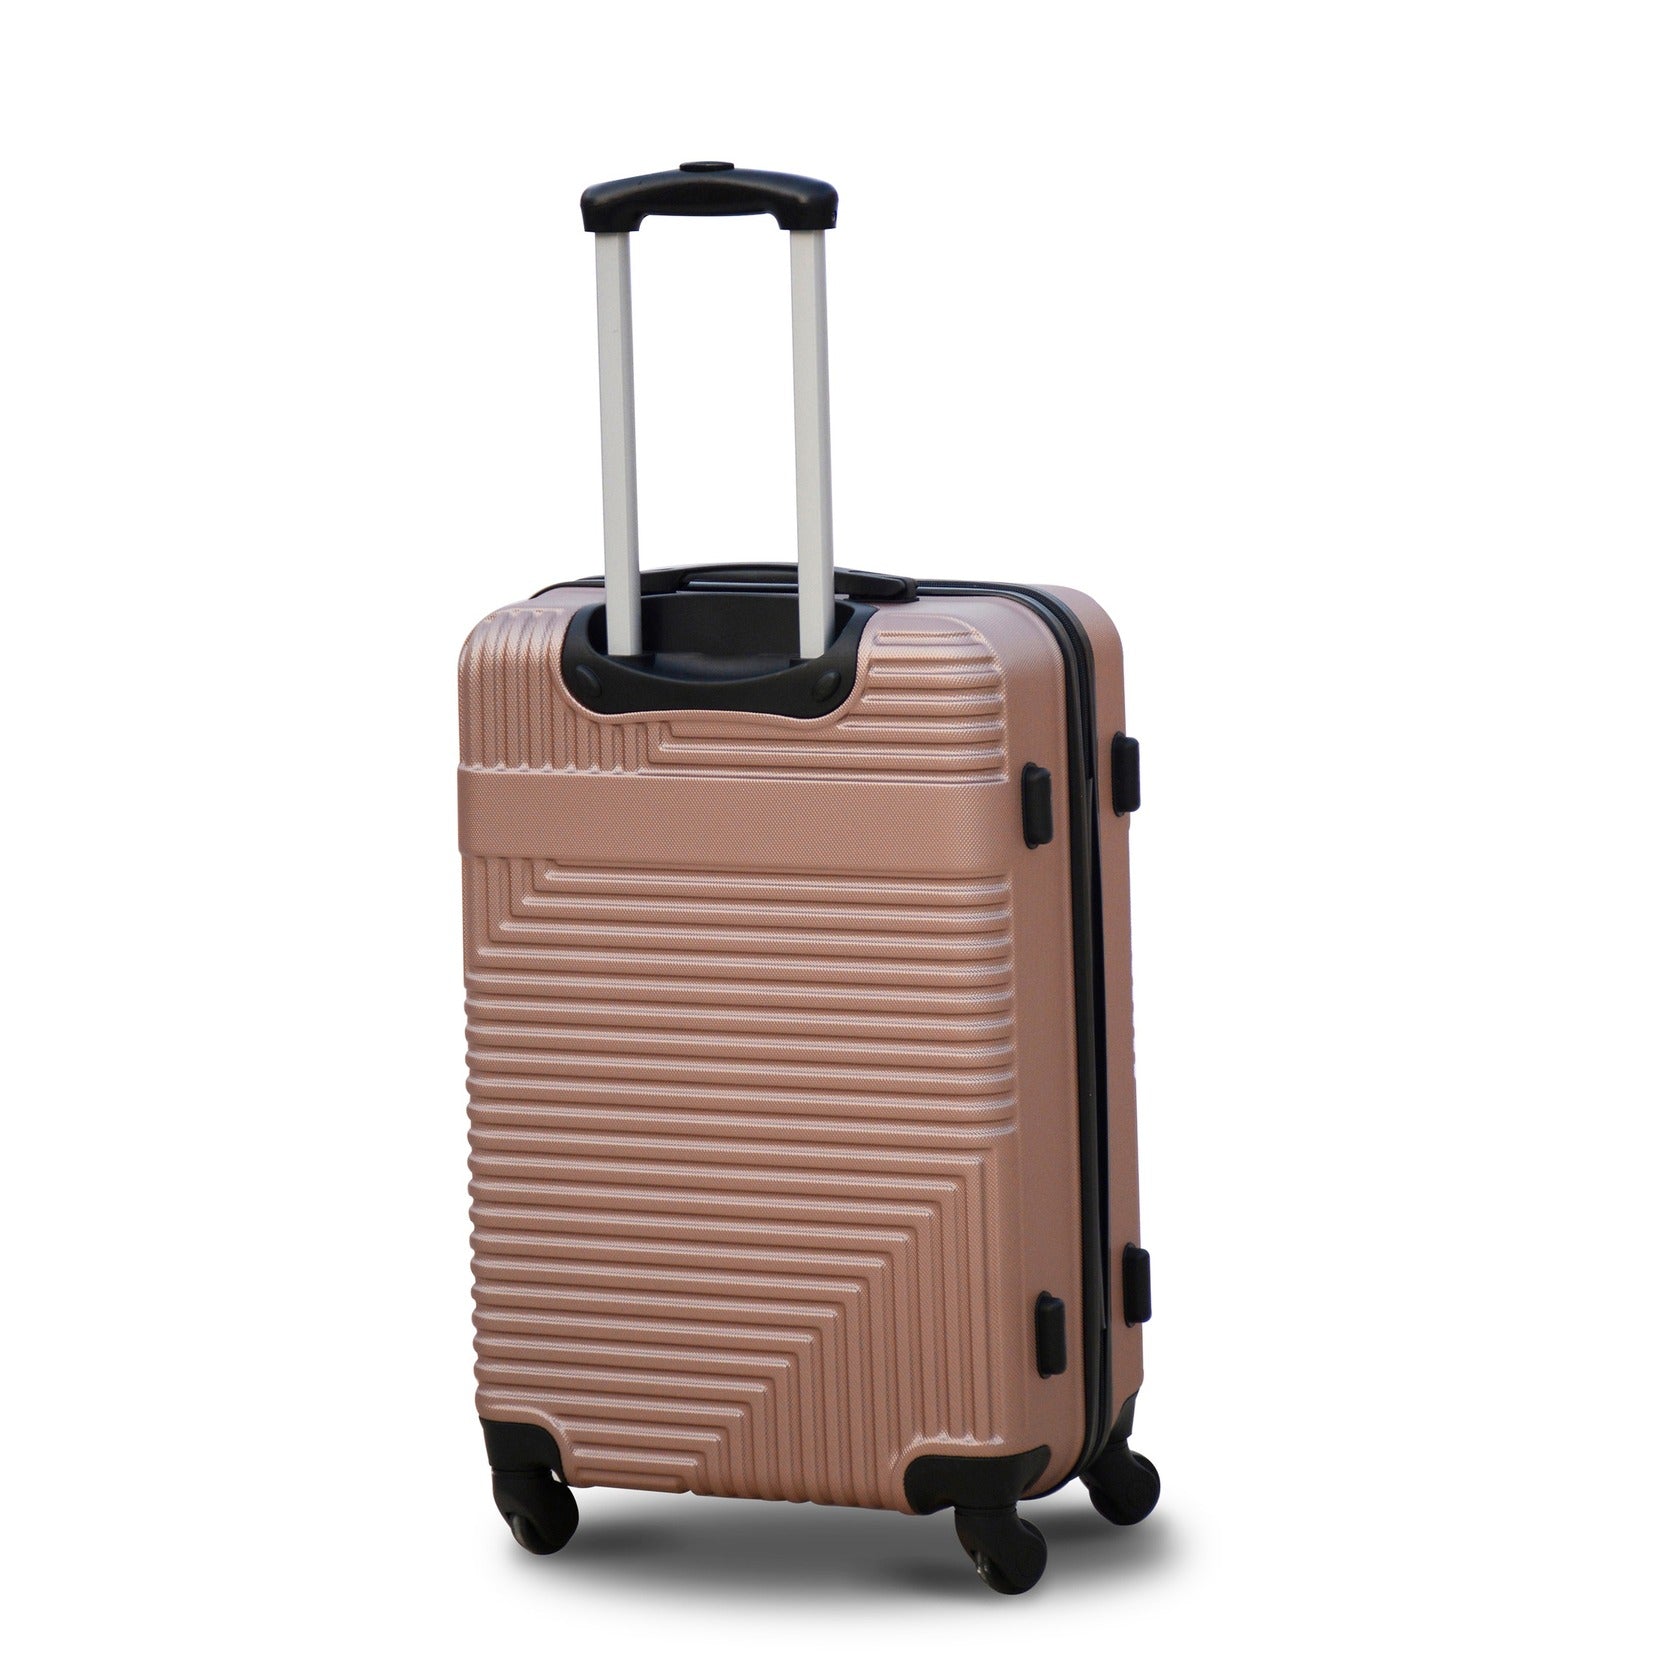 20" Rose Gold Travel Way ABS Lightweight Luggage Bag With Spinner Wheel